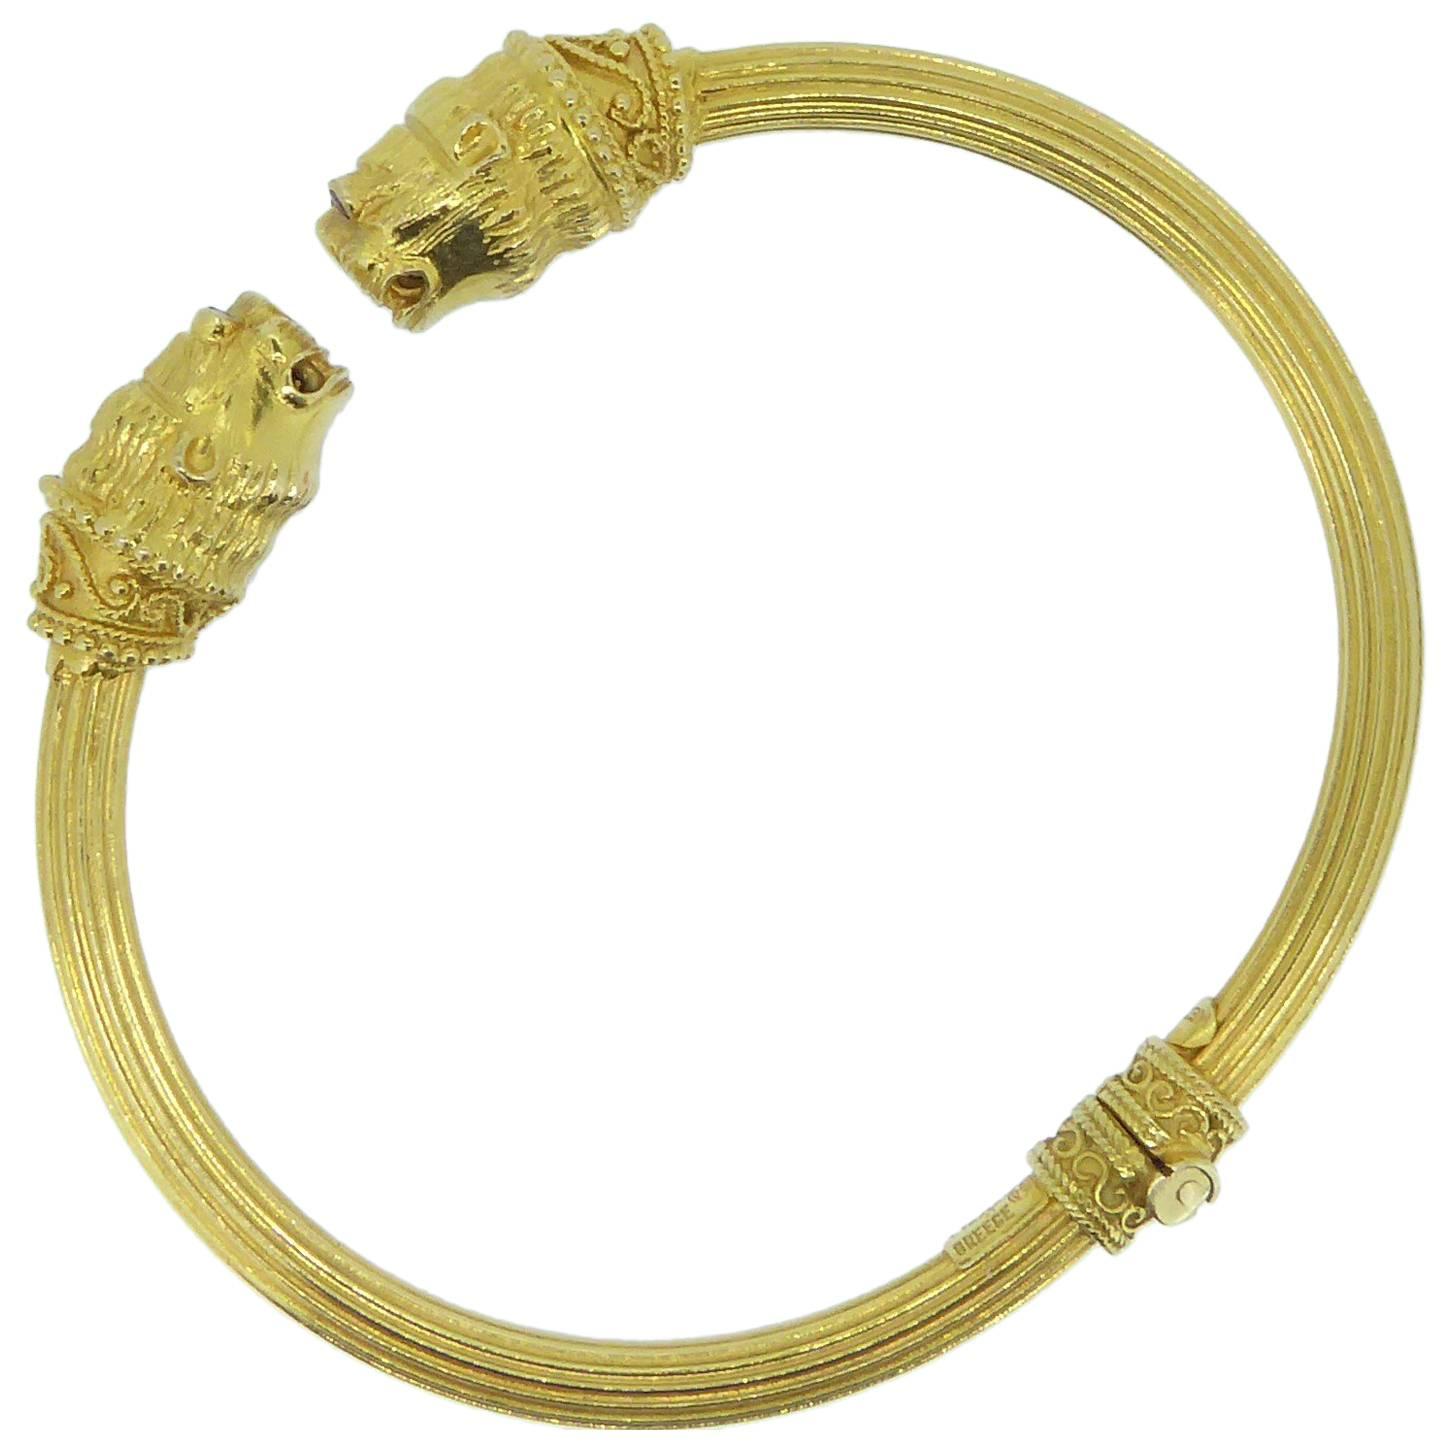 Lalaounis 18 Carat Yellow Gold Double-Headed Lion Bangle